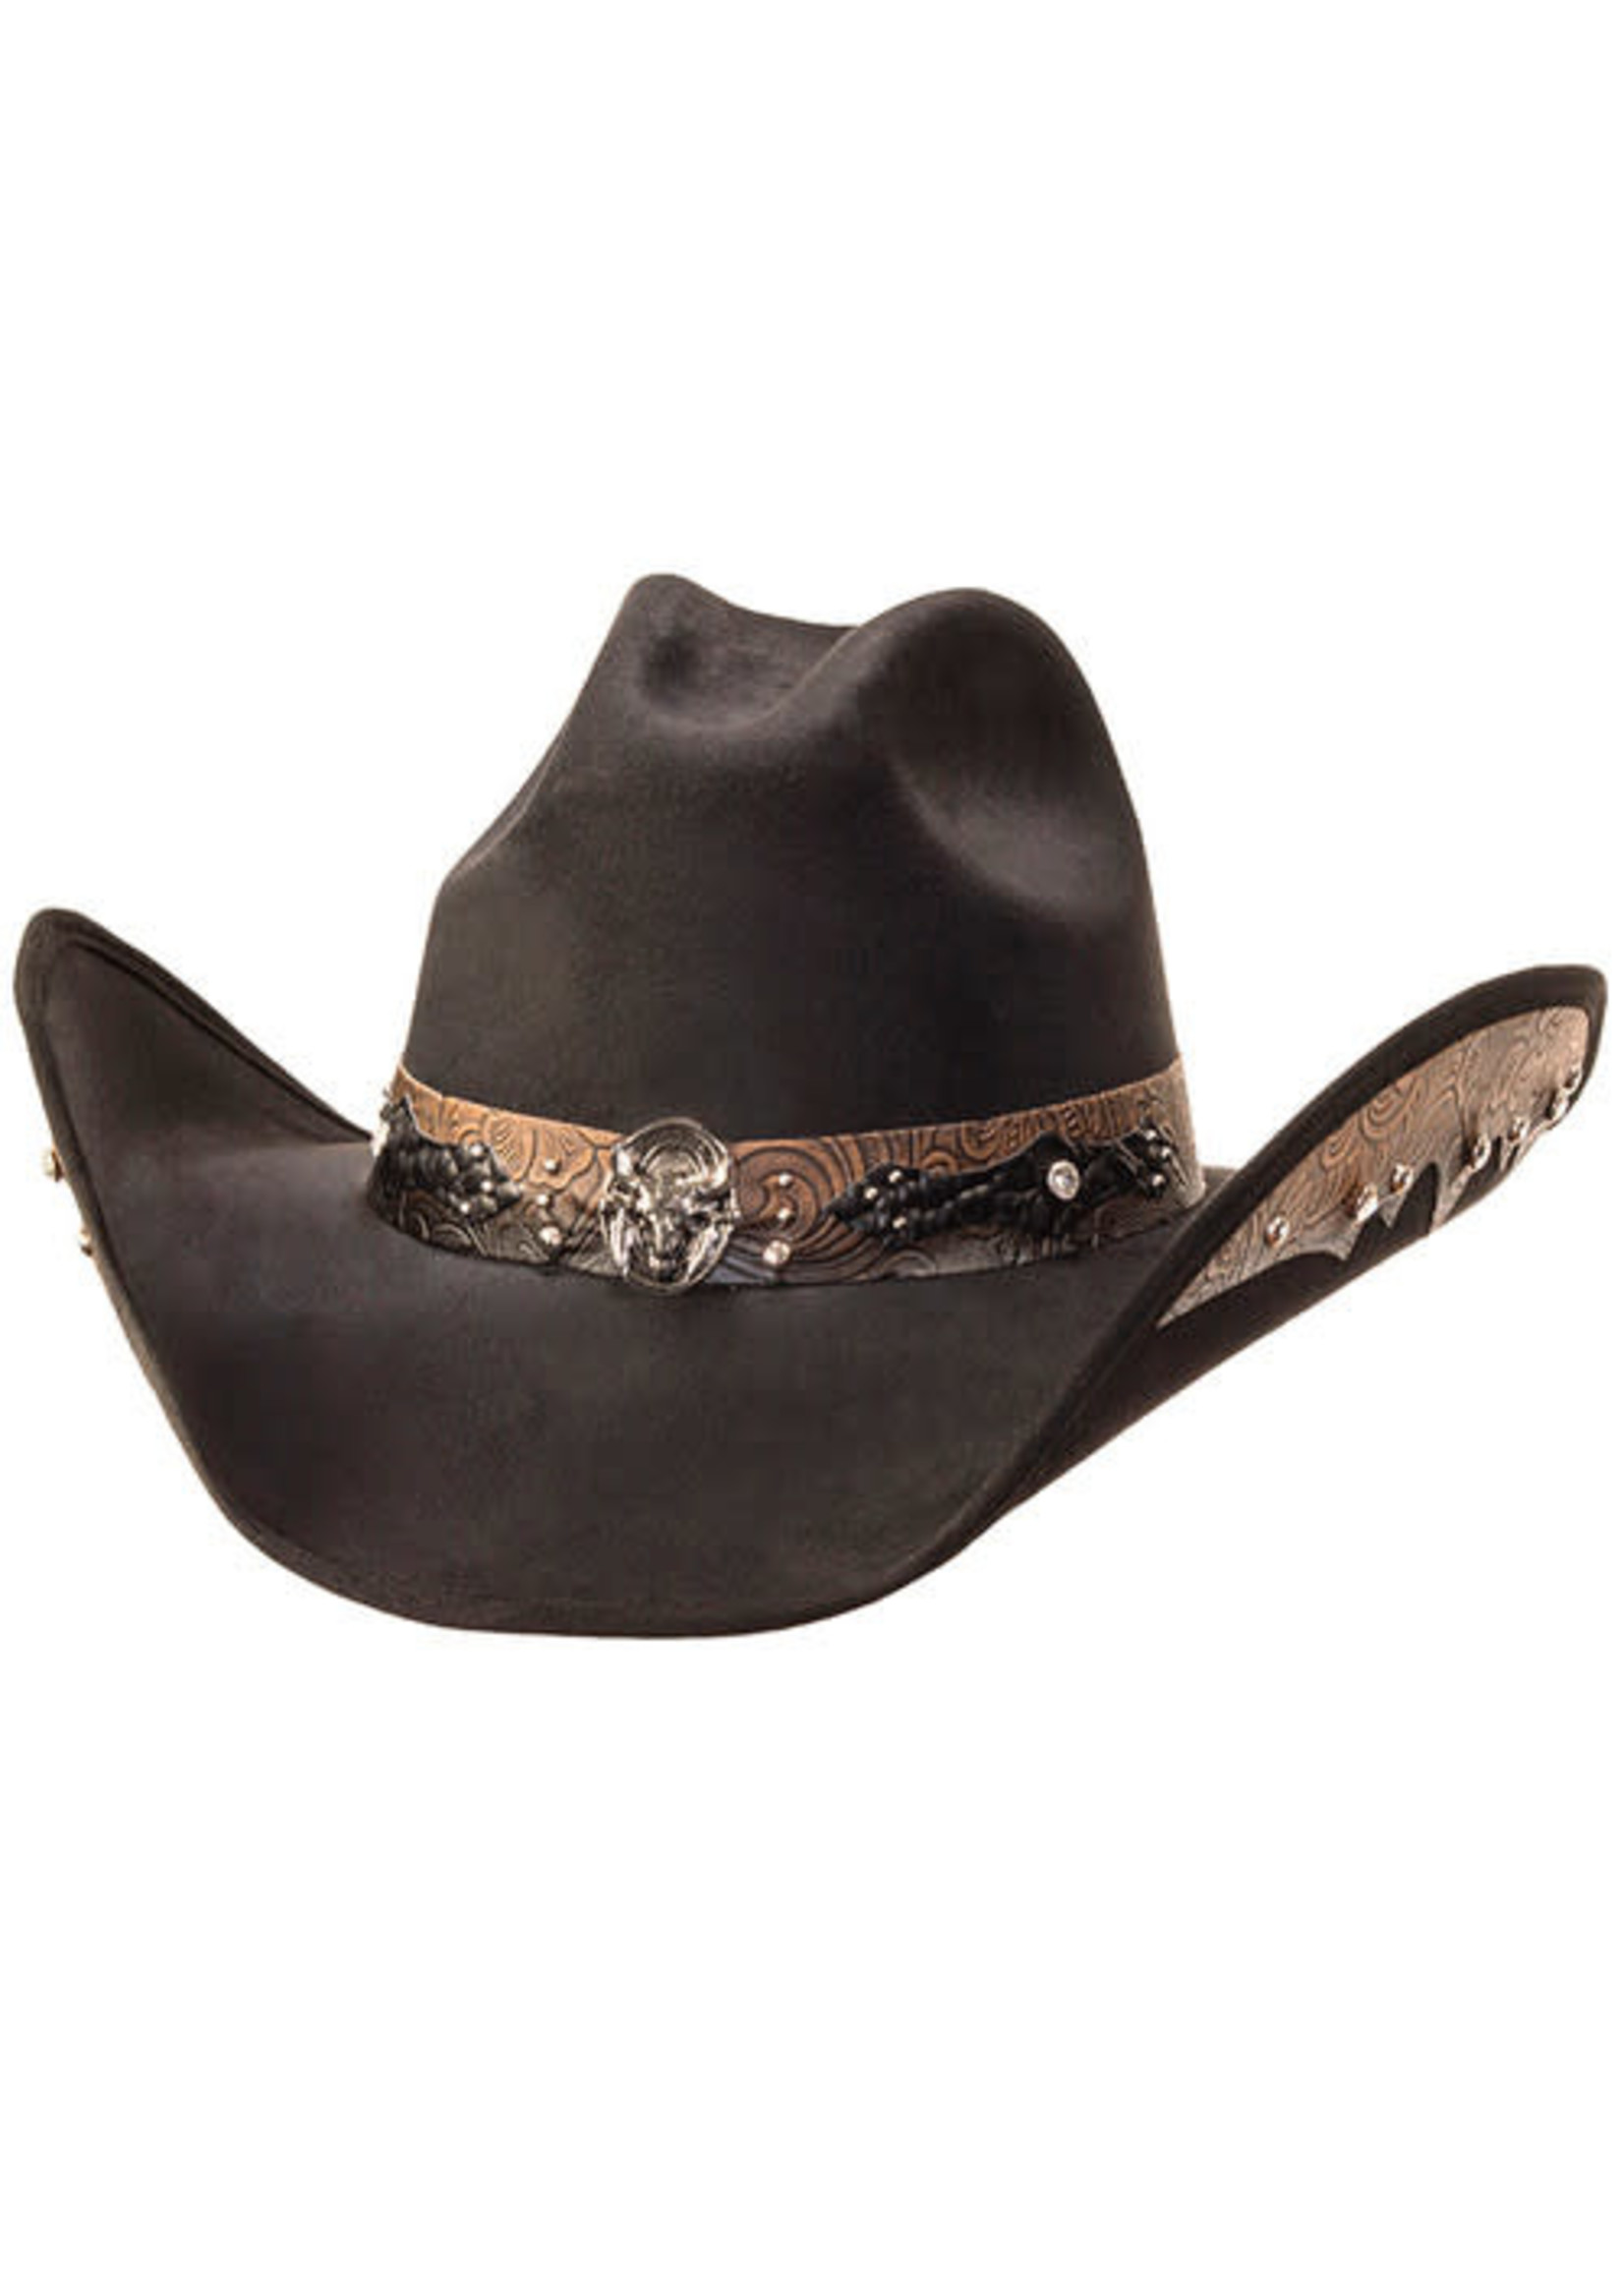 Black Suede Like Western Hat with Steer Skull on Hat Band & Leather Sides